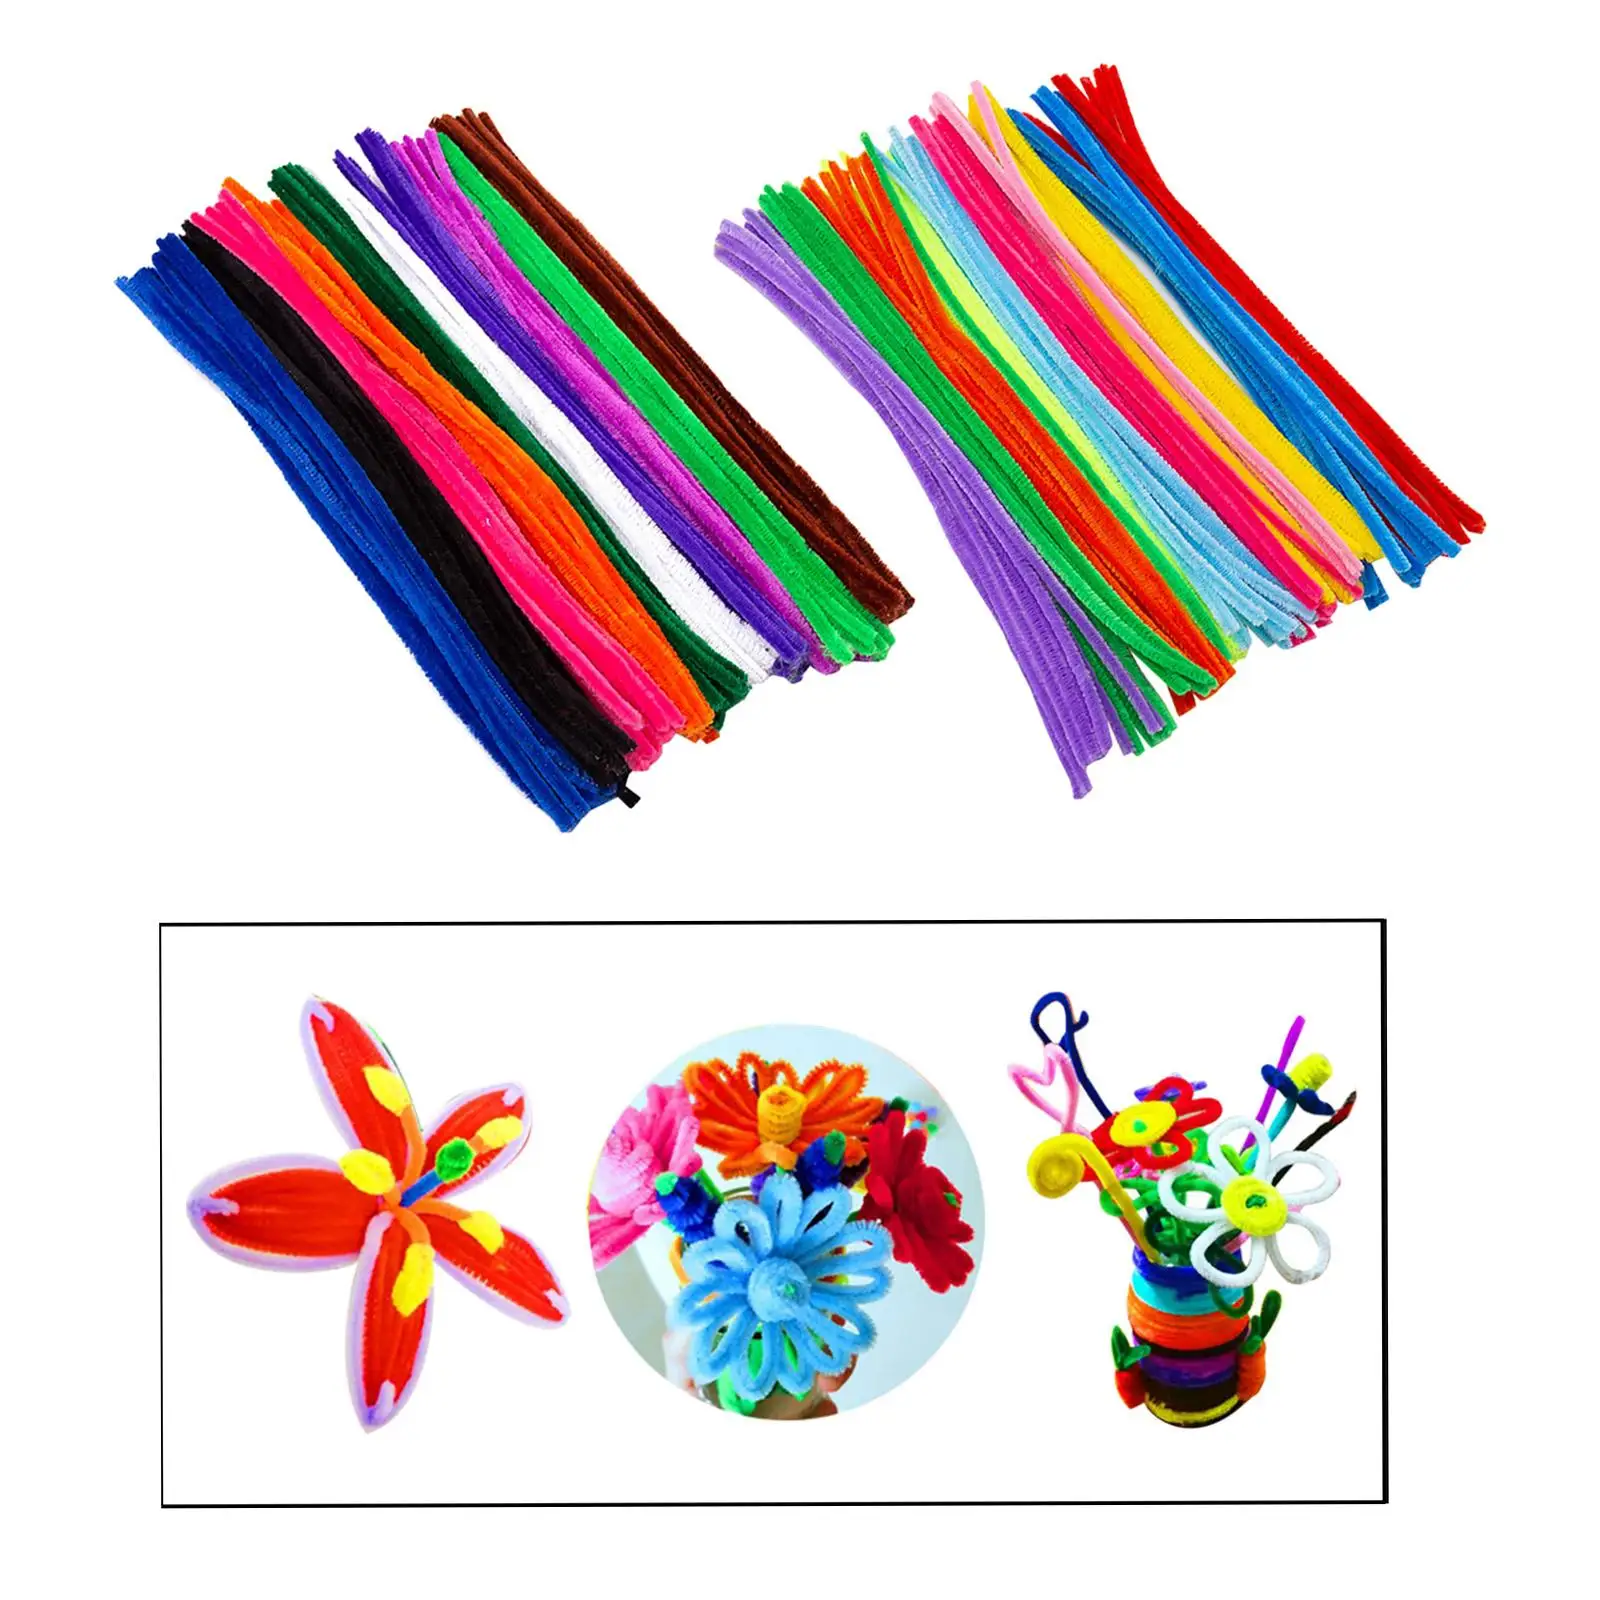 Multipurpose Twisting Bar Educational Toy Colorful Gifts Crafting Materials Soft Crafts Supplies for Preschool Holiday Beginner